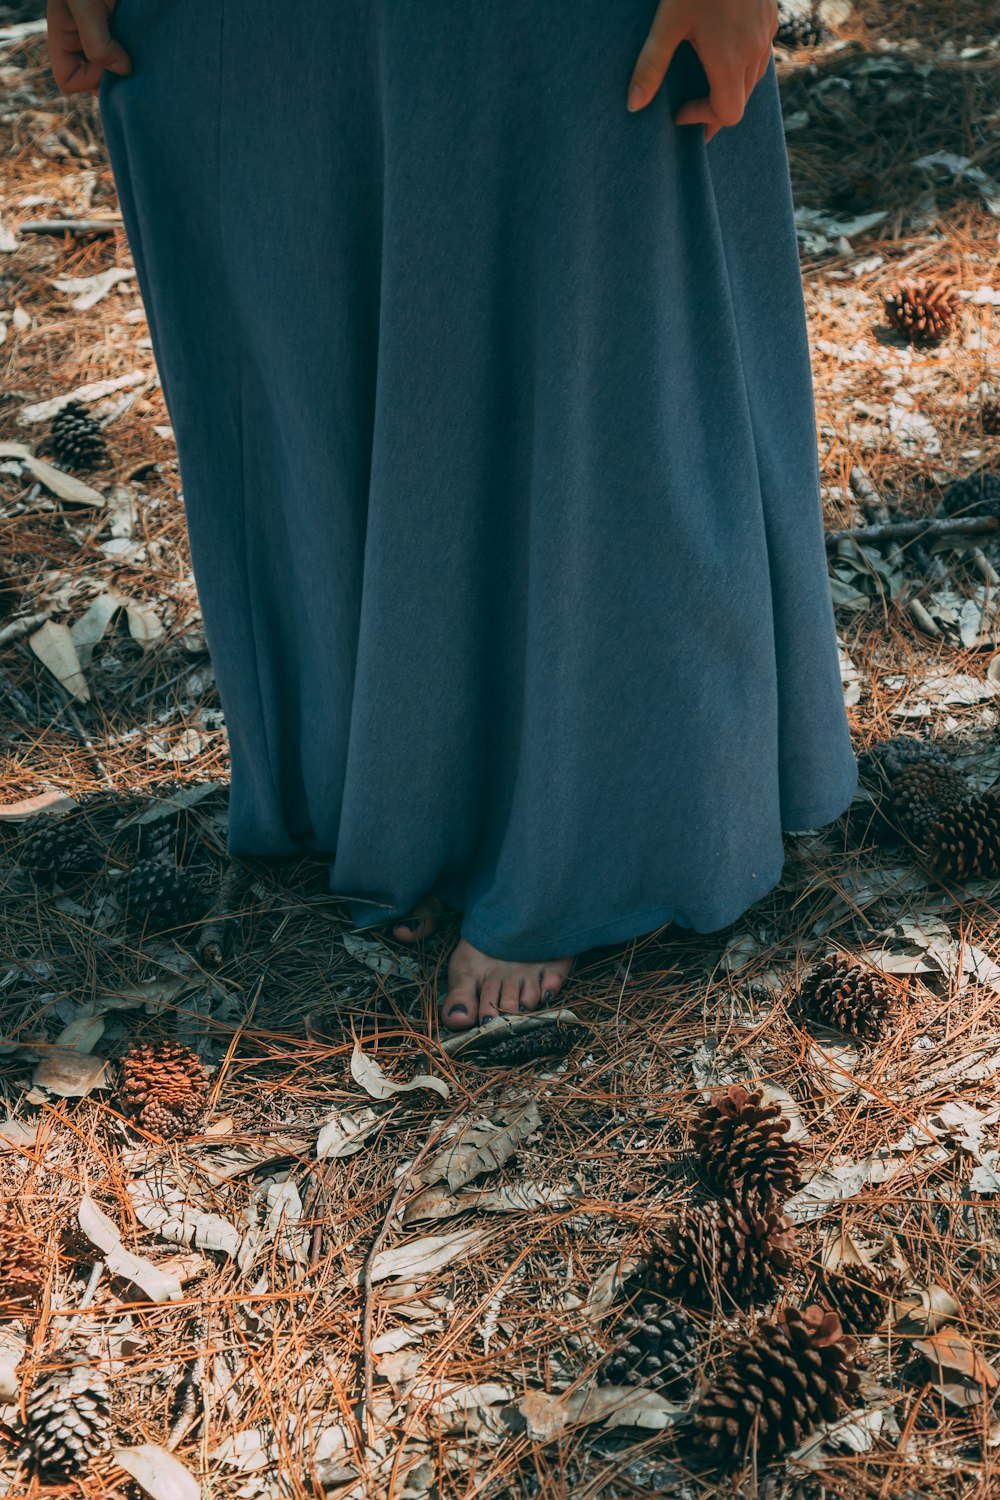 person in gray robe standing on dried leaves